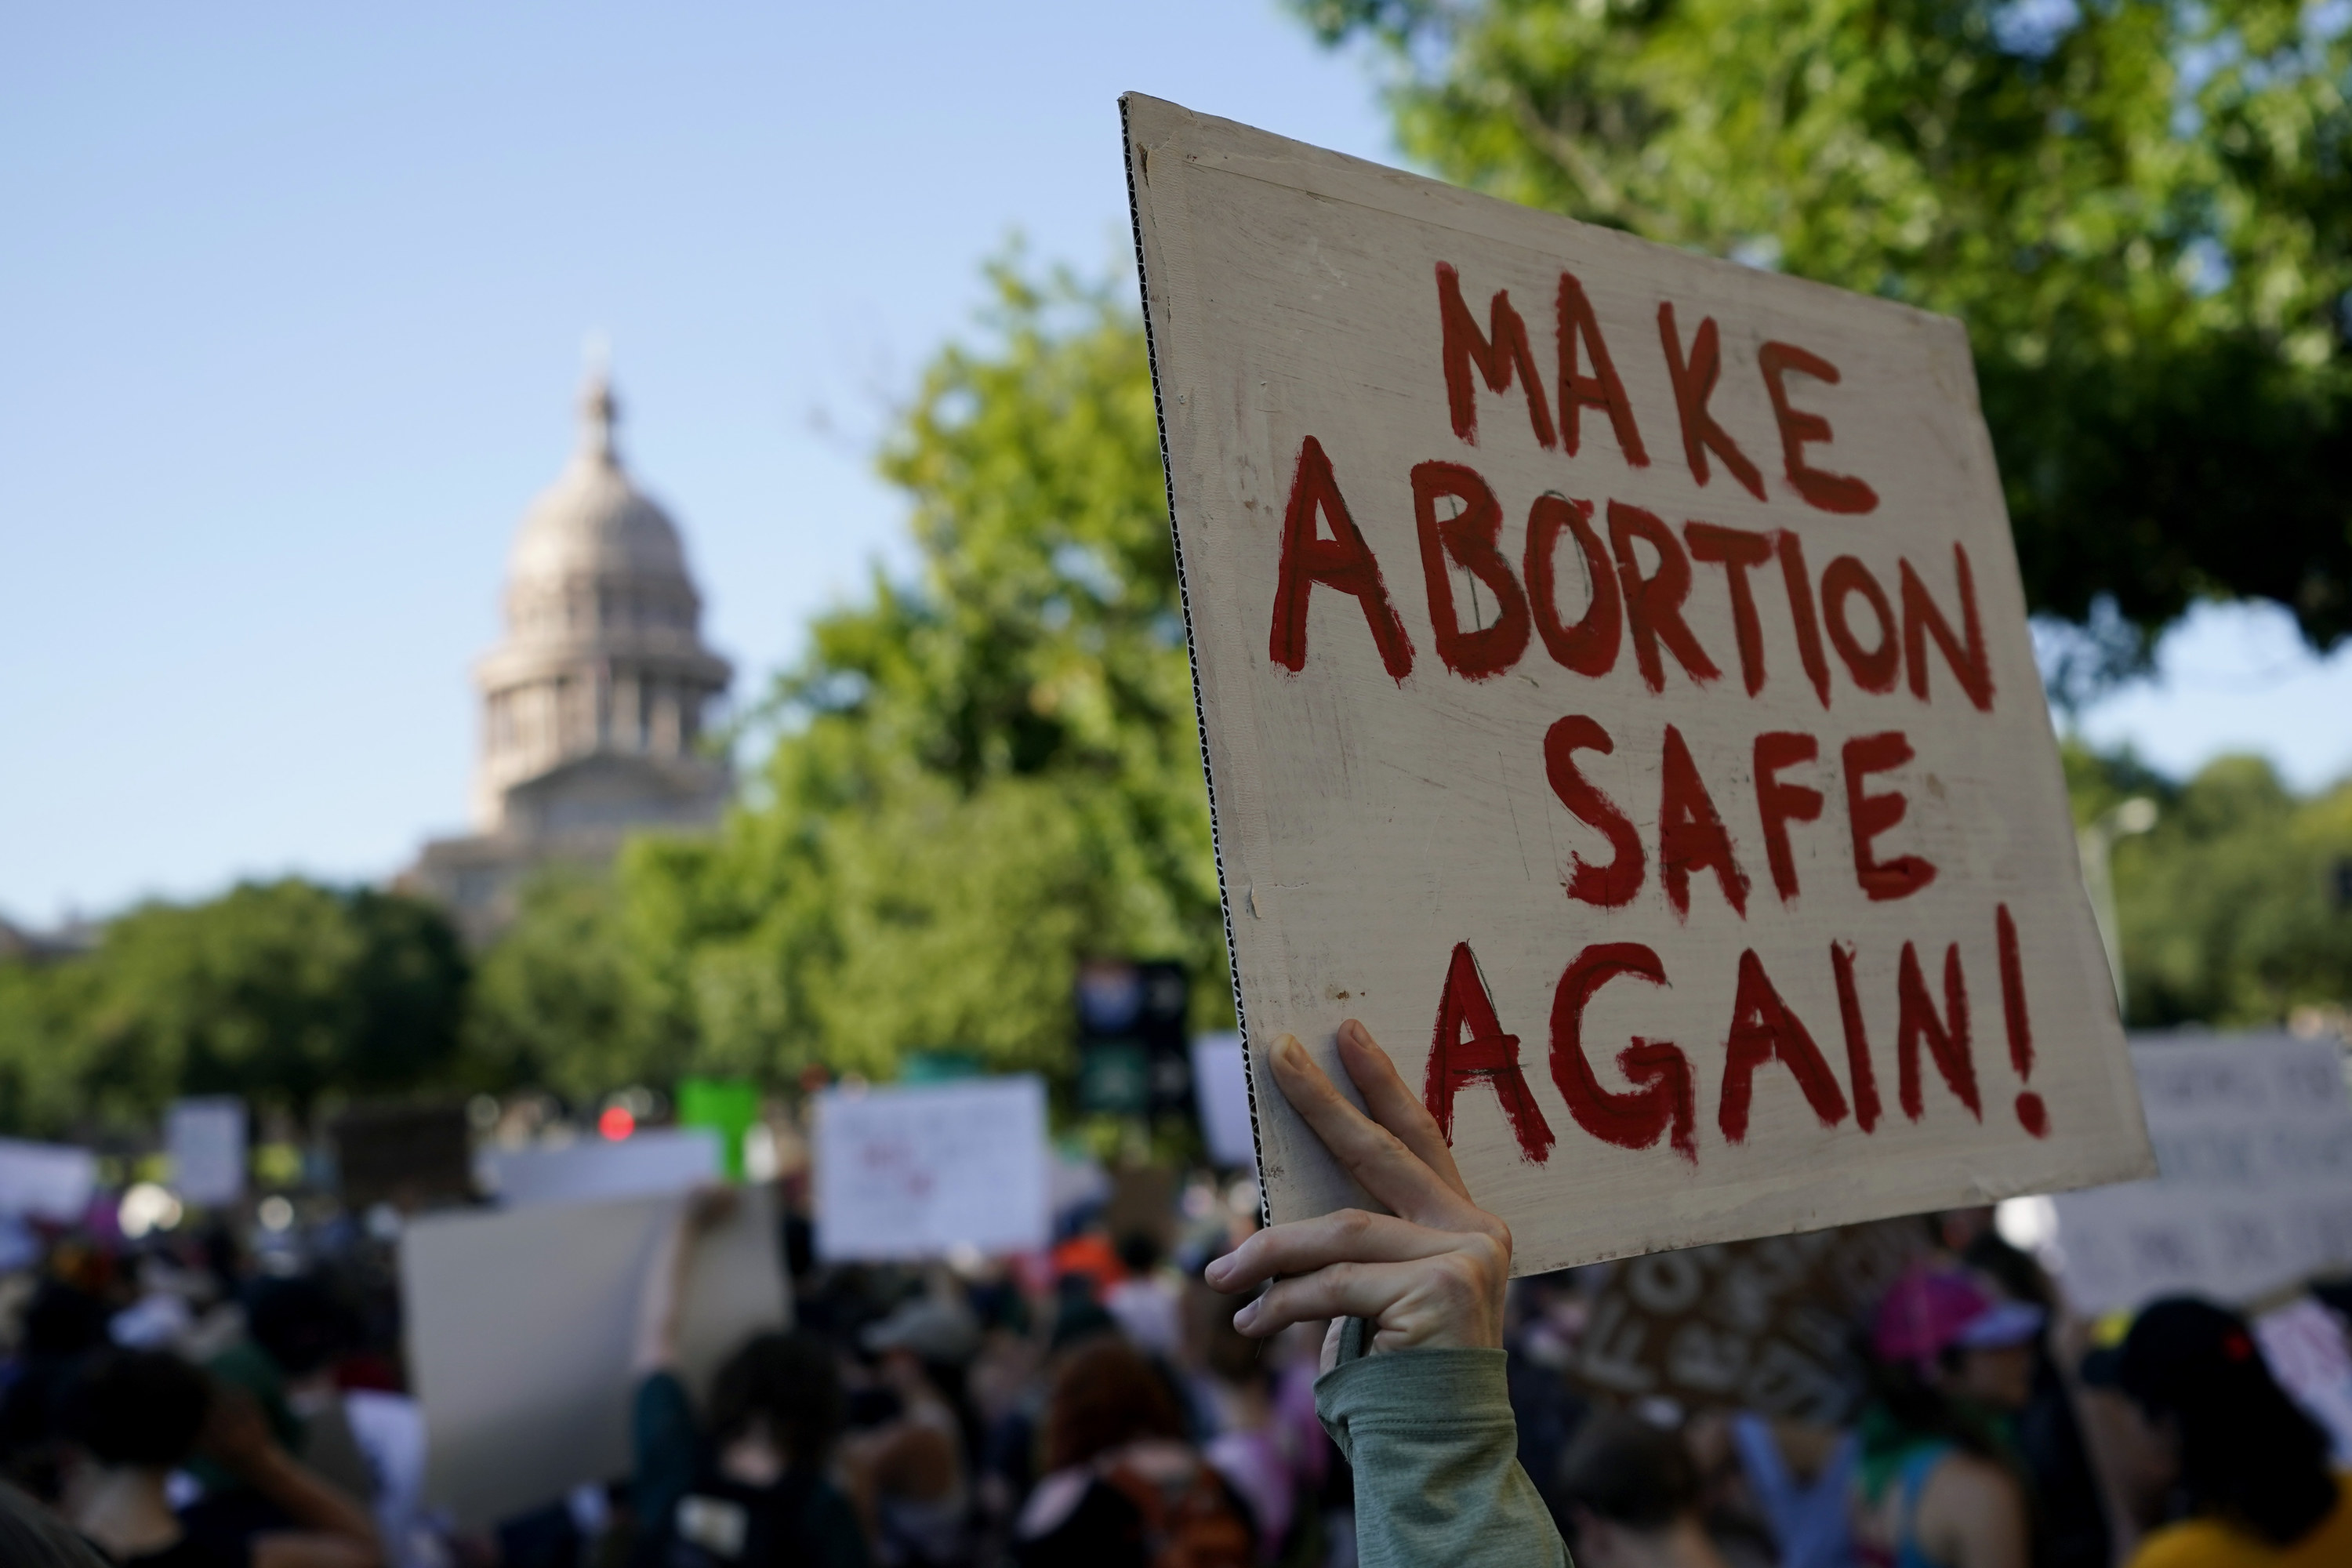 Sign held up: &quot;Make abortion safe again!&quot;